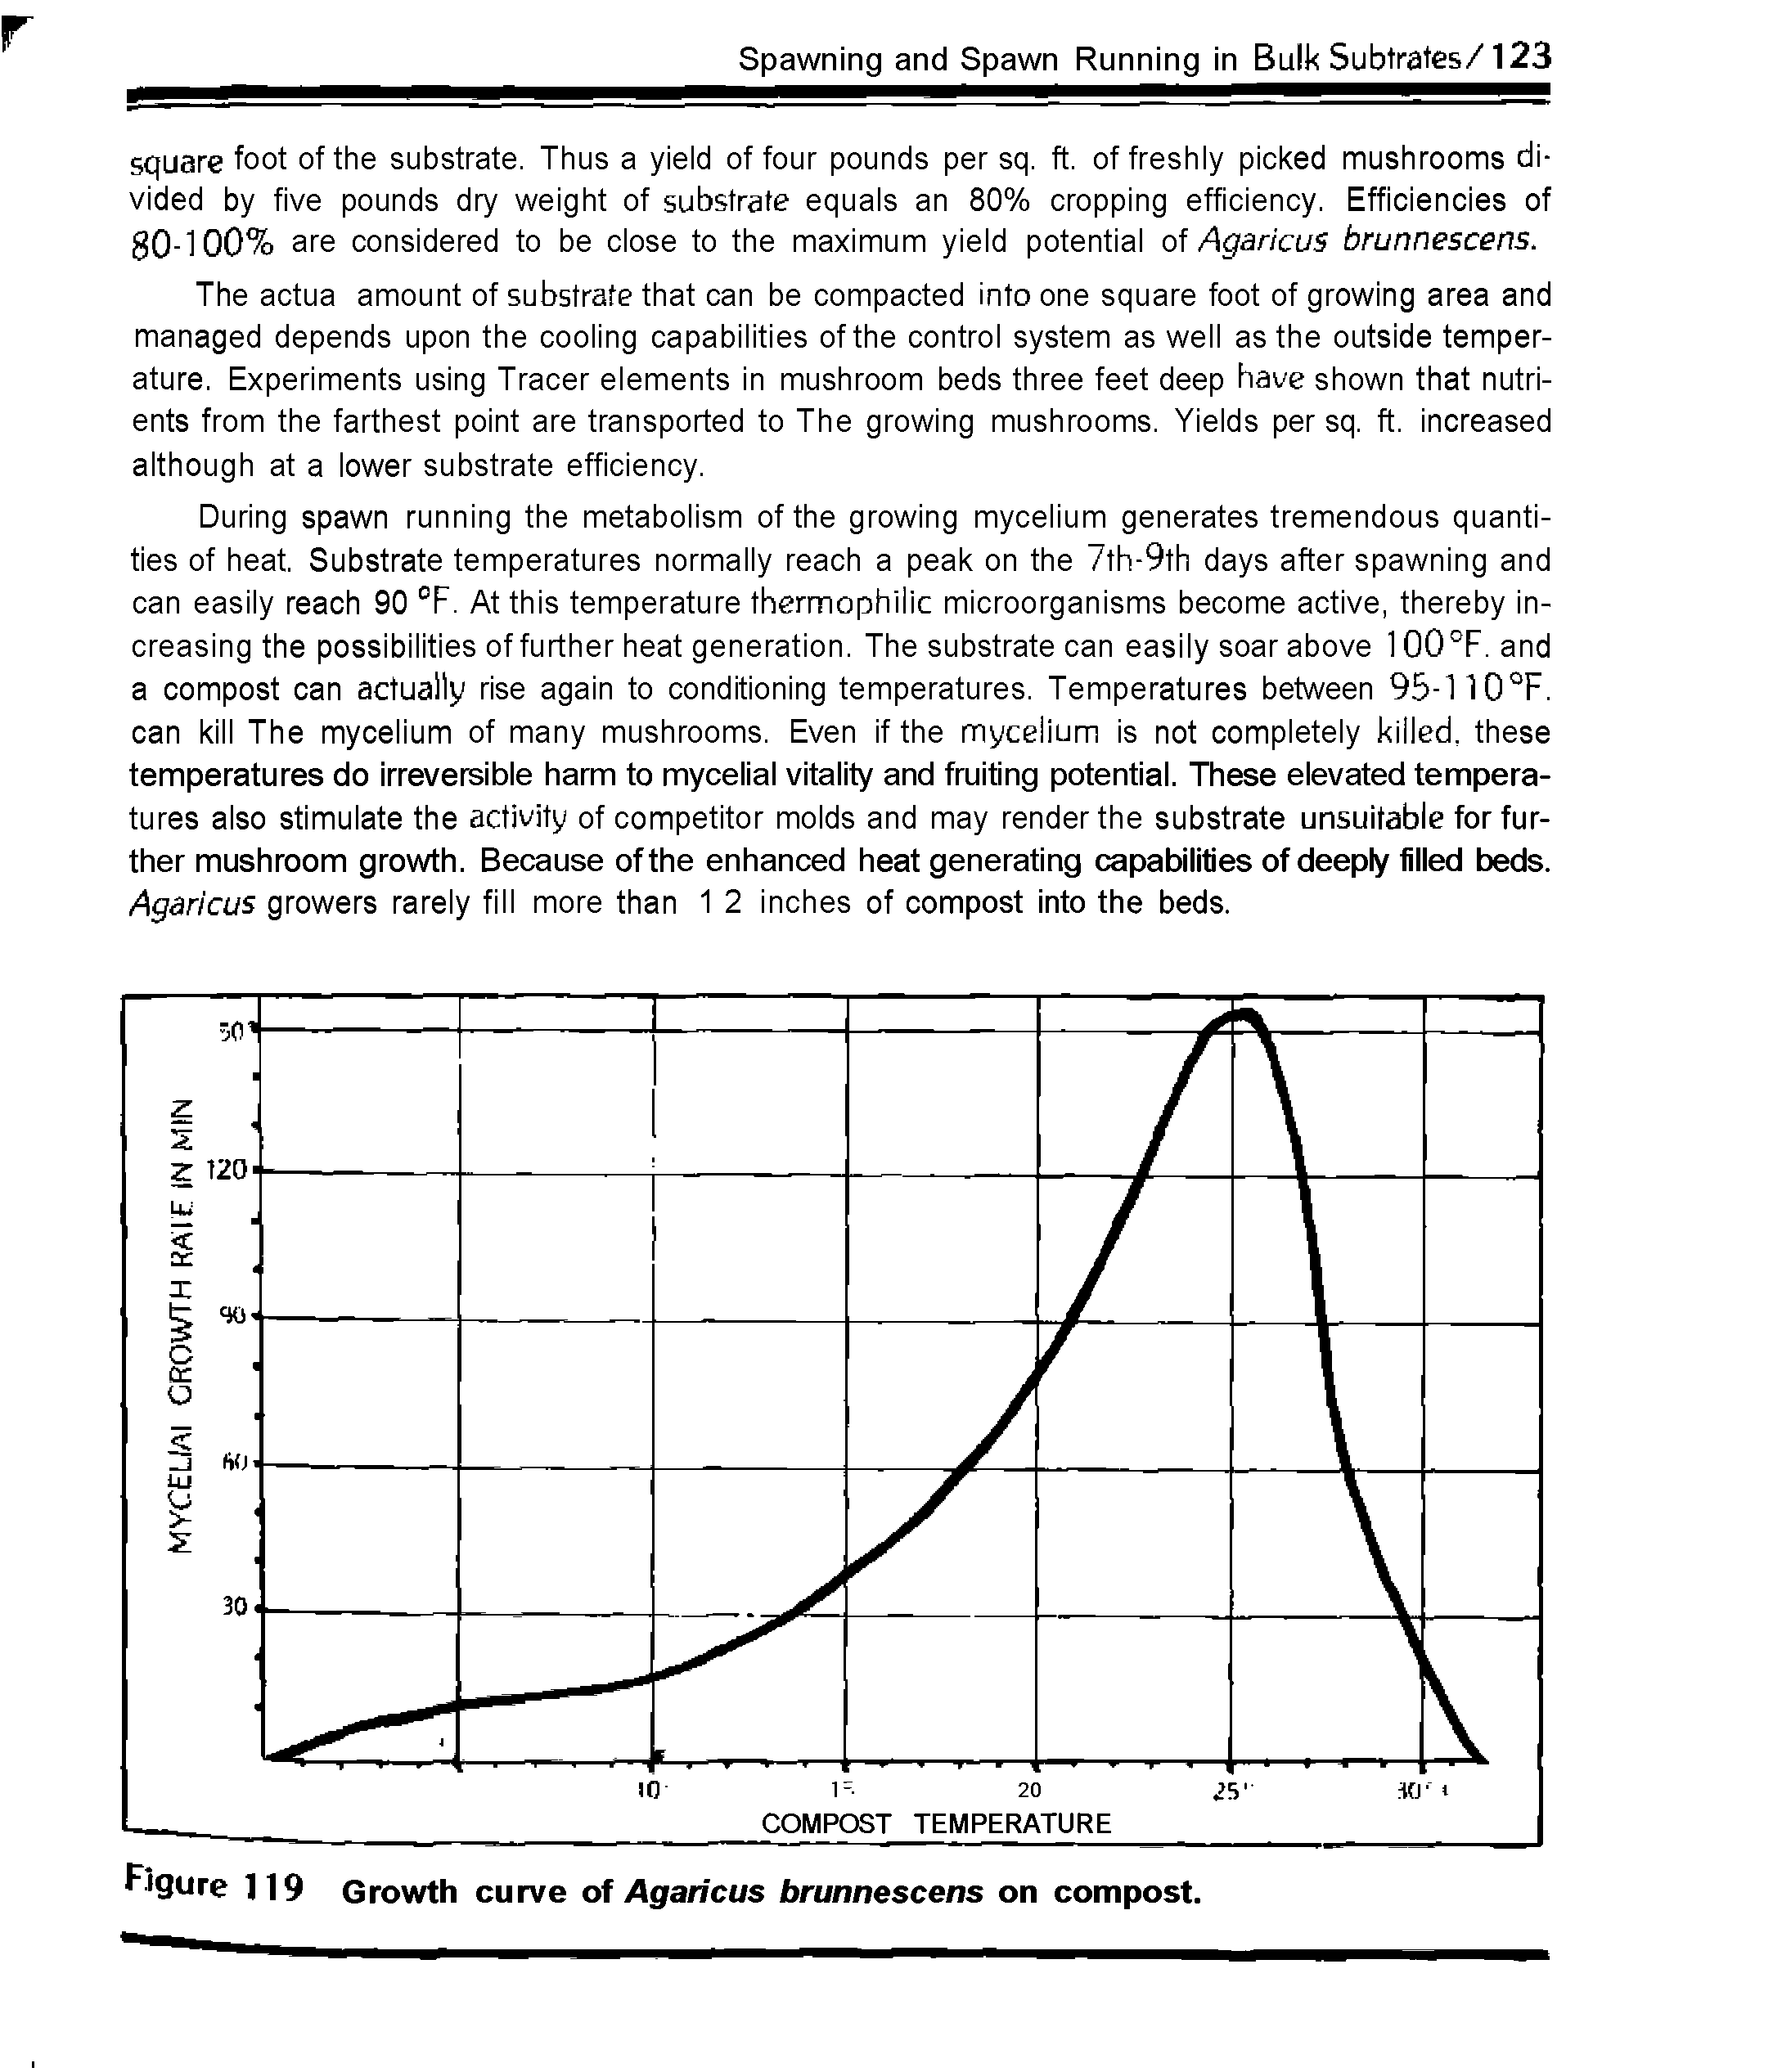 Figure 119 Growth curve of Agaricus brunnescens on compost.